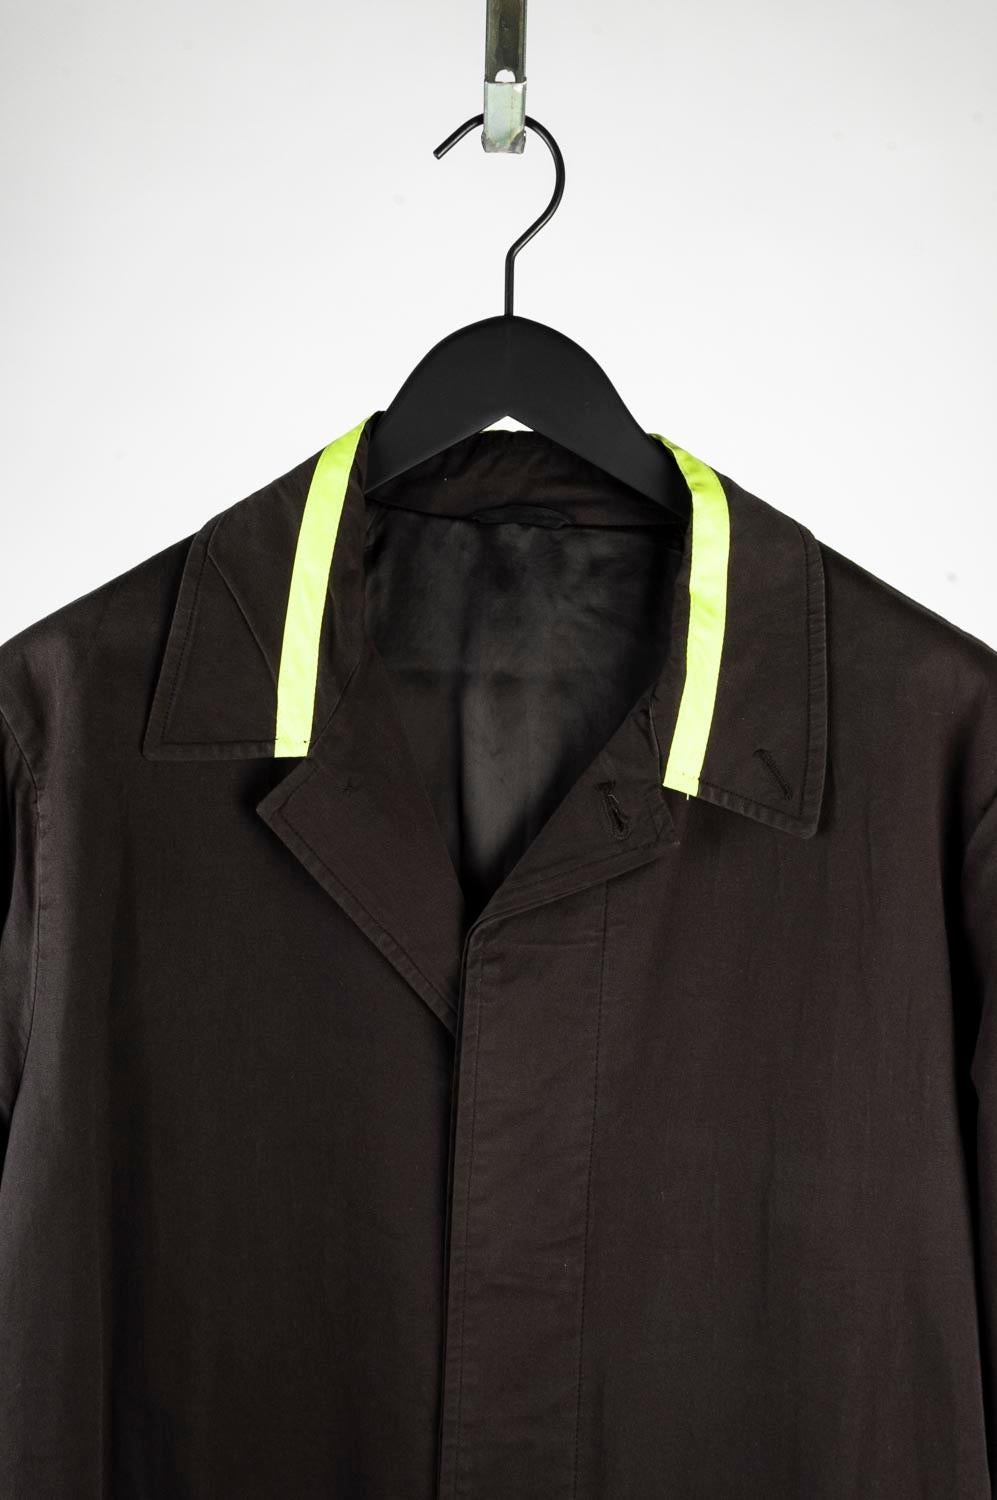 100% genuine Helmut Lang Vintage Men Coat
Color: Black
(An actual color may a bit vary due to individual computer screen interpretation)
Material: 98% cotton, 2% spandex
Tag size: ITA52 (runs large)
This jacket is great quality item. Rate 8,5 of 10,